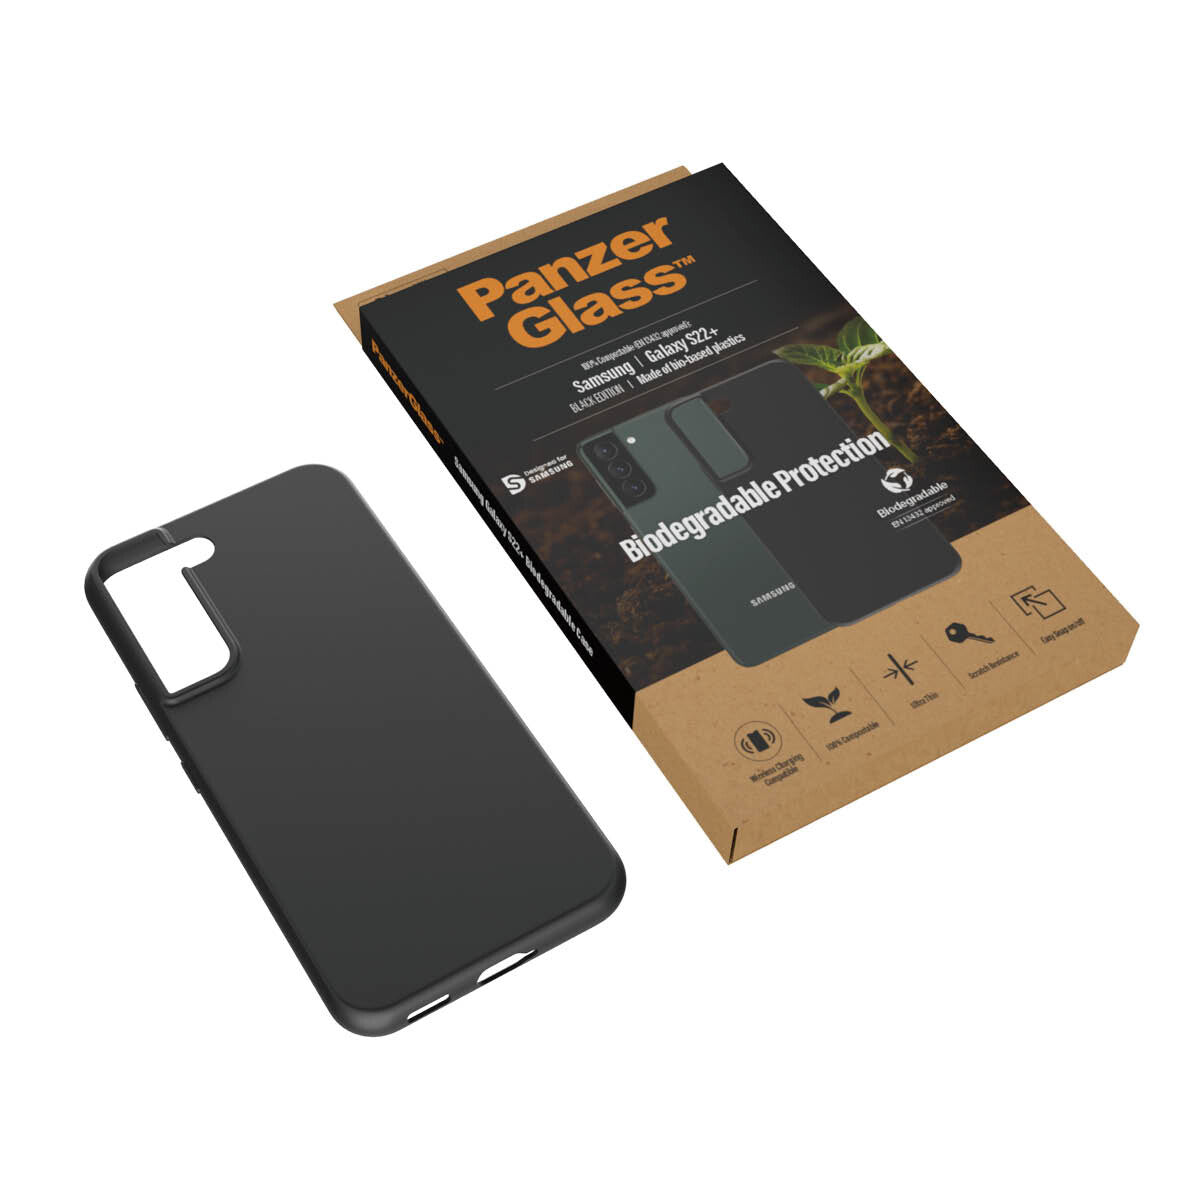 PanzerGlass ® Biodegradable Case for Galaxy S22 Plus in Black